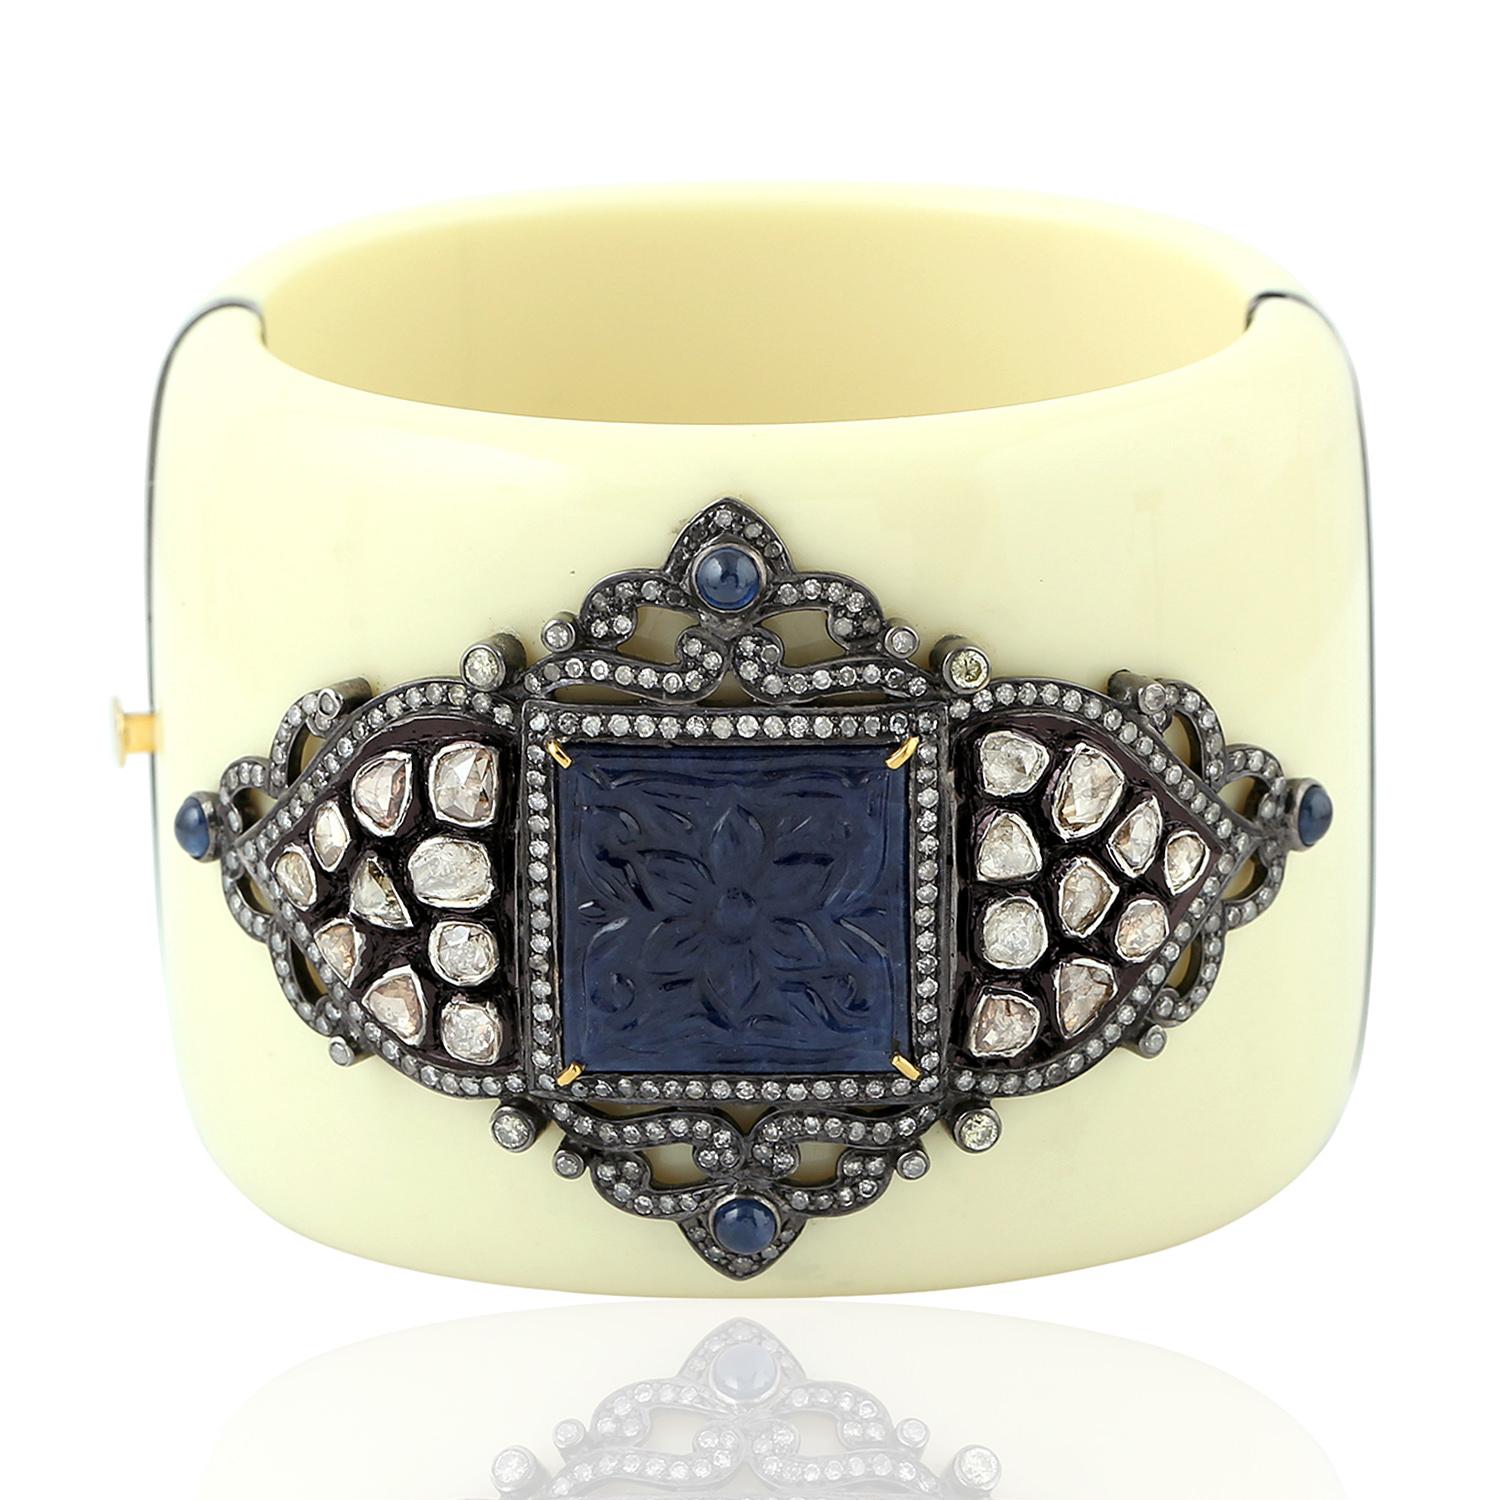 Cabochon Carved Sapphire Bakelite Cuff with Diamond Motif